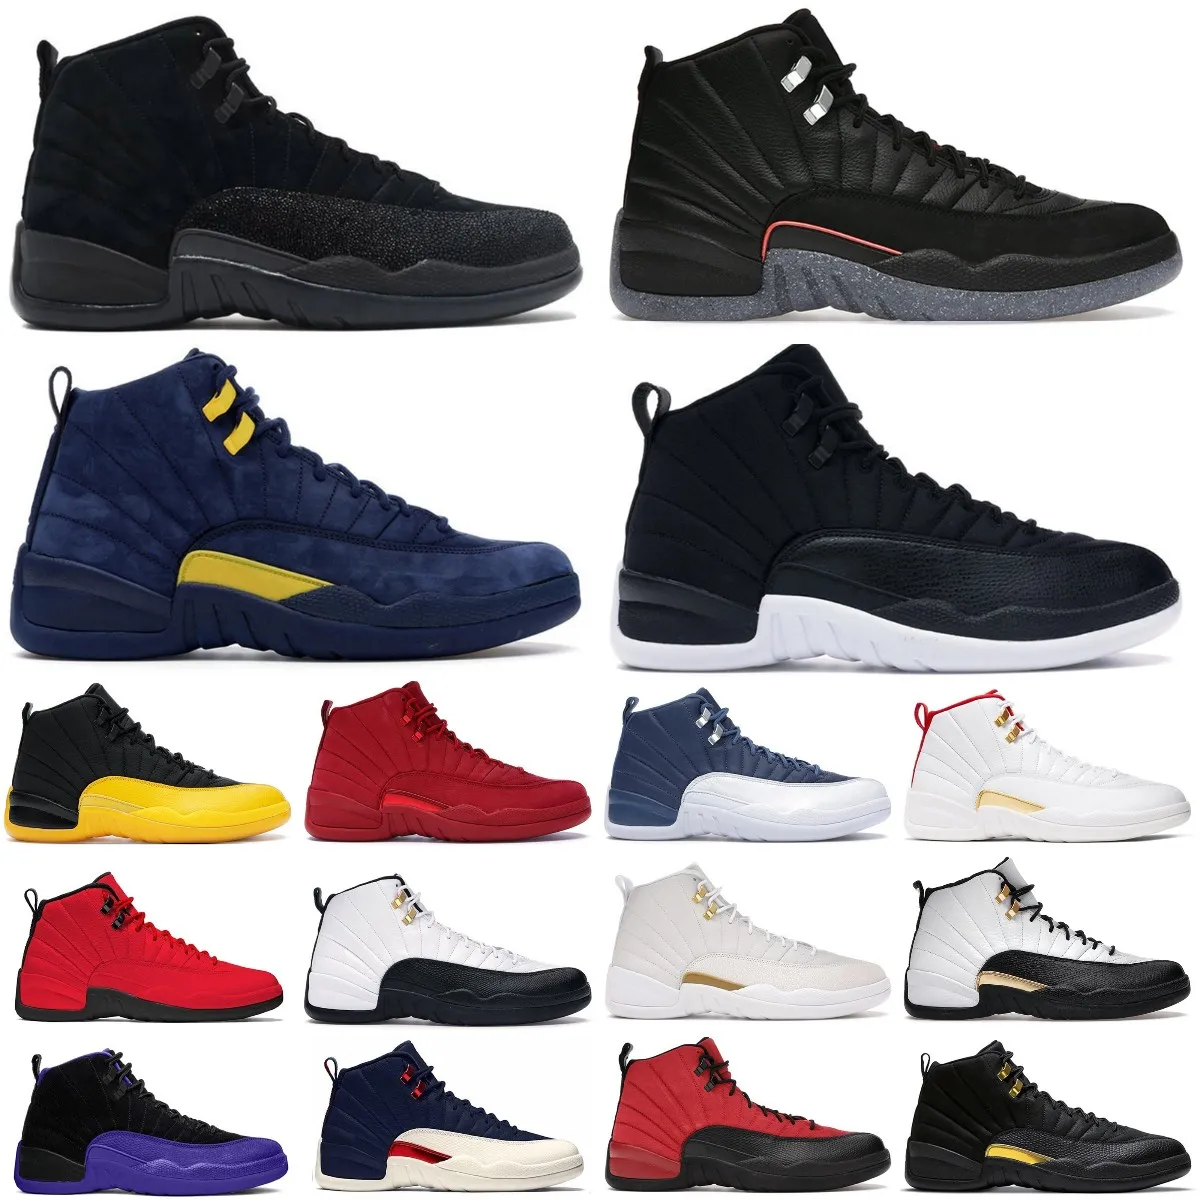 2023 New Jumpman 12 Basketball Shoes 12s Eastside Golf A Ma Maniere 25 años en China Floral Stealth Hyper Royal Black Taxi Playoffs Dark Concord Sneakers Entrenadores